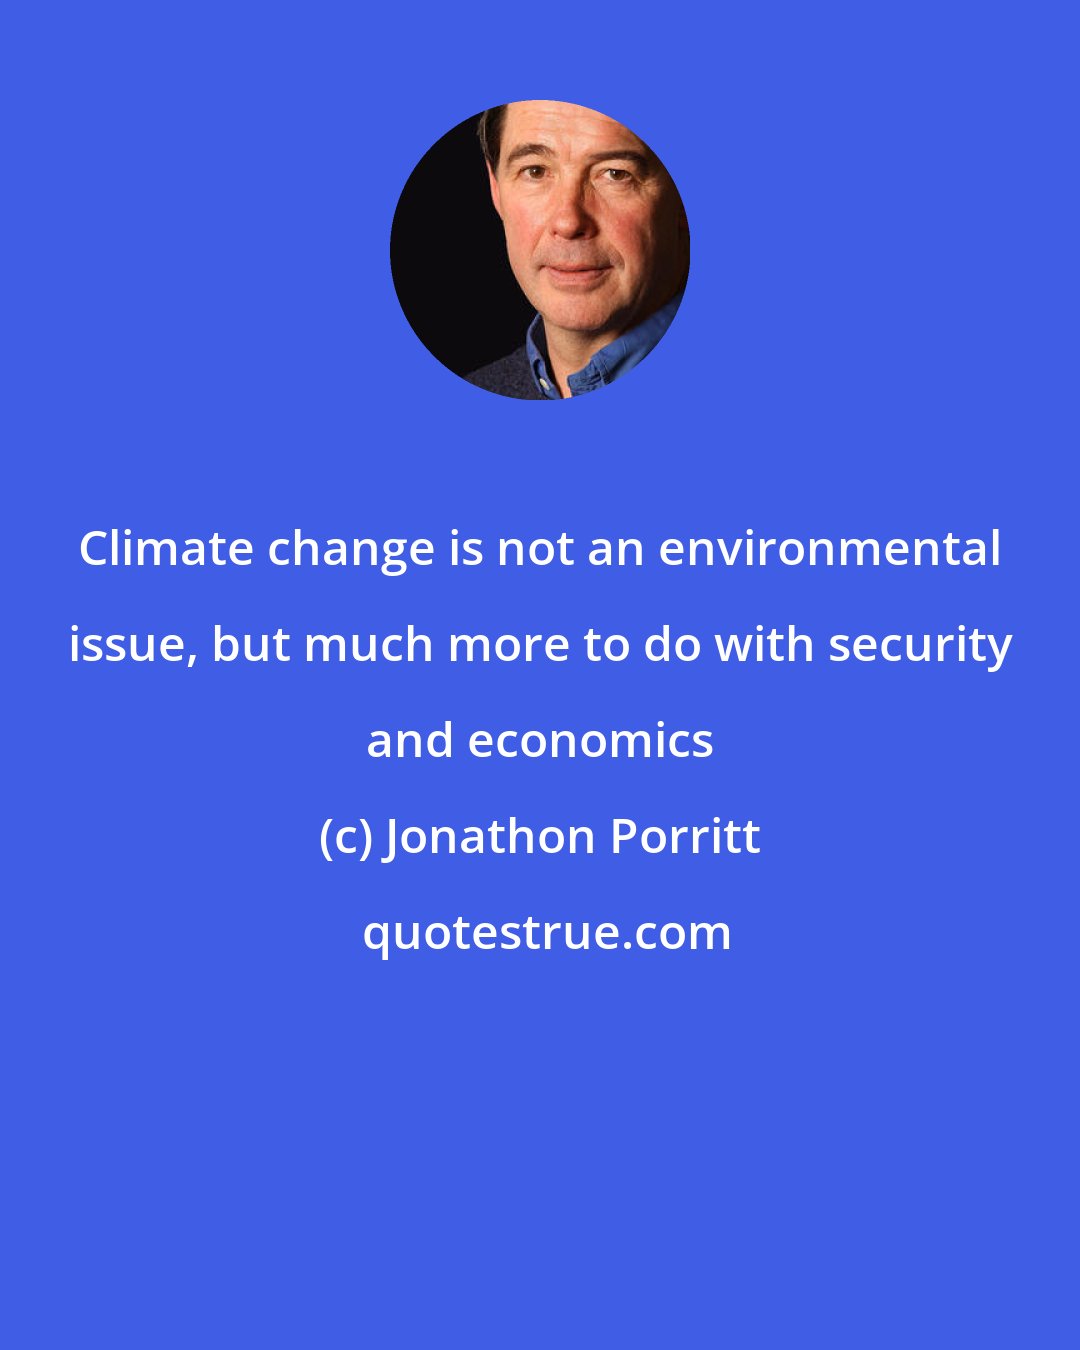 Jonathon Porritt: Climate change is not an environmental issue, but much more to do with security and economics